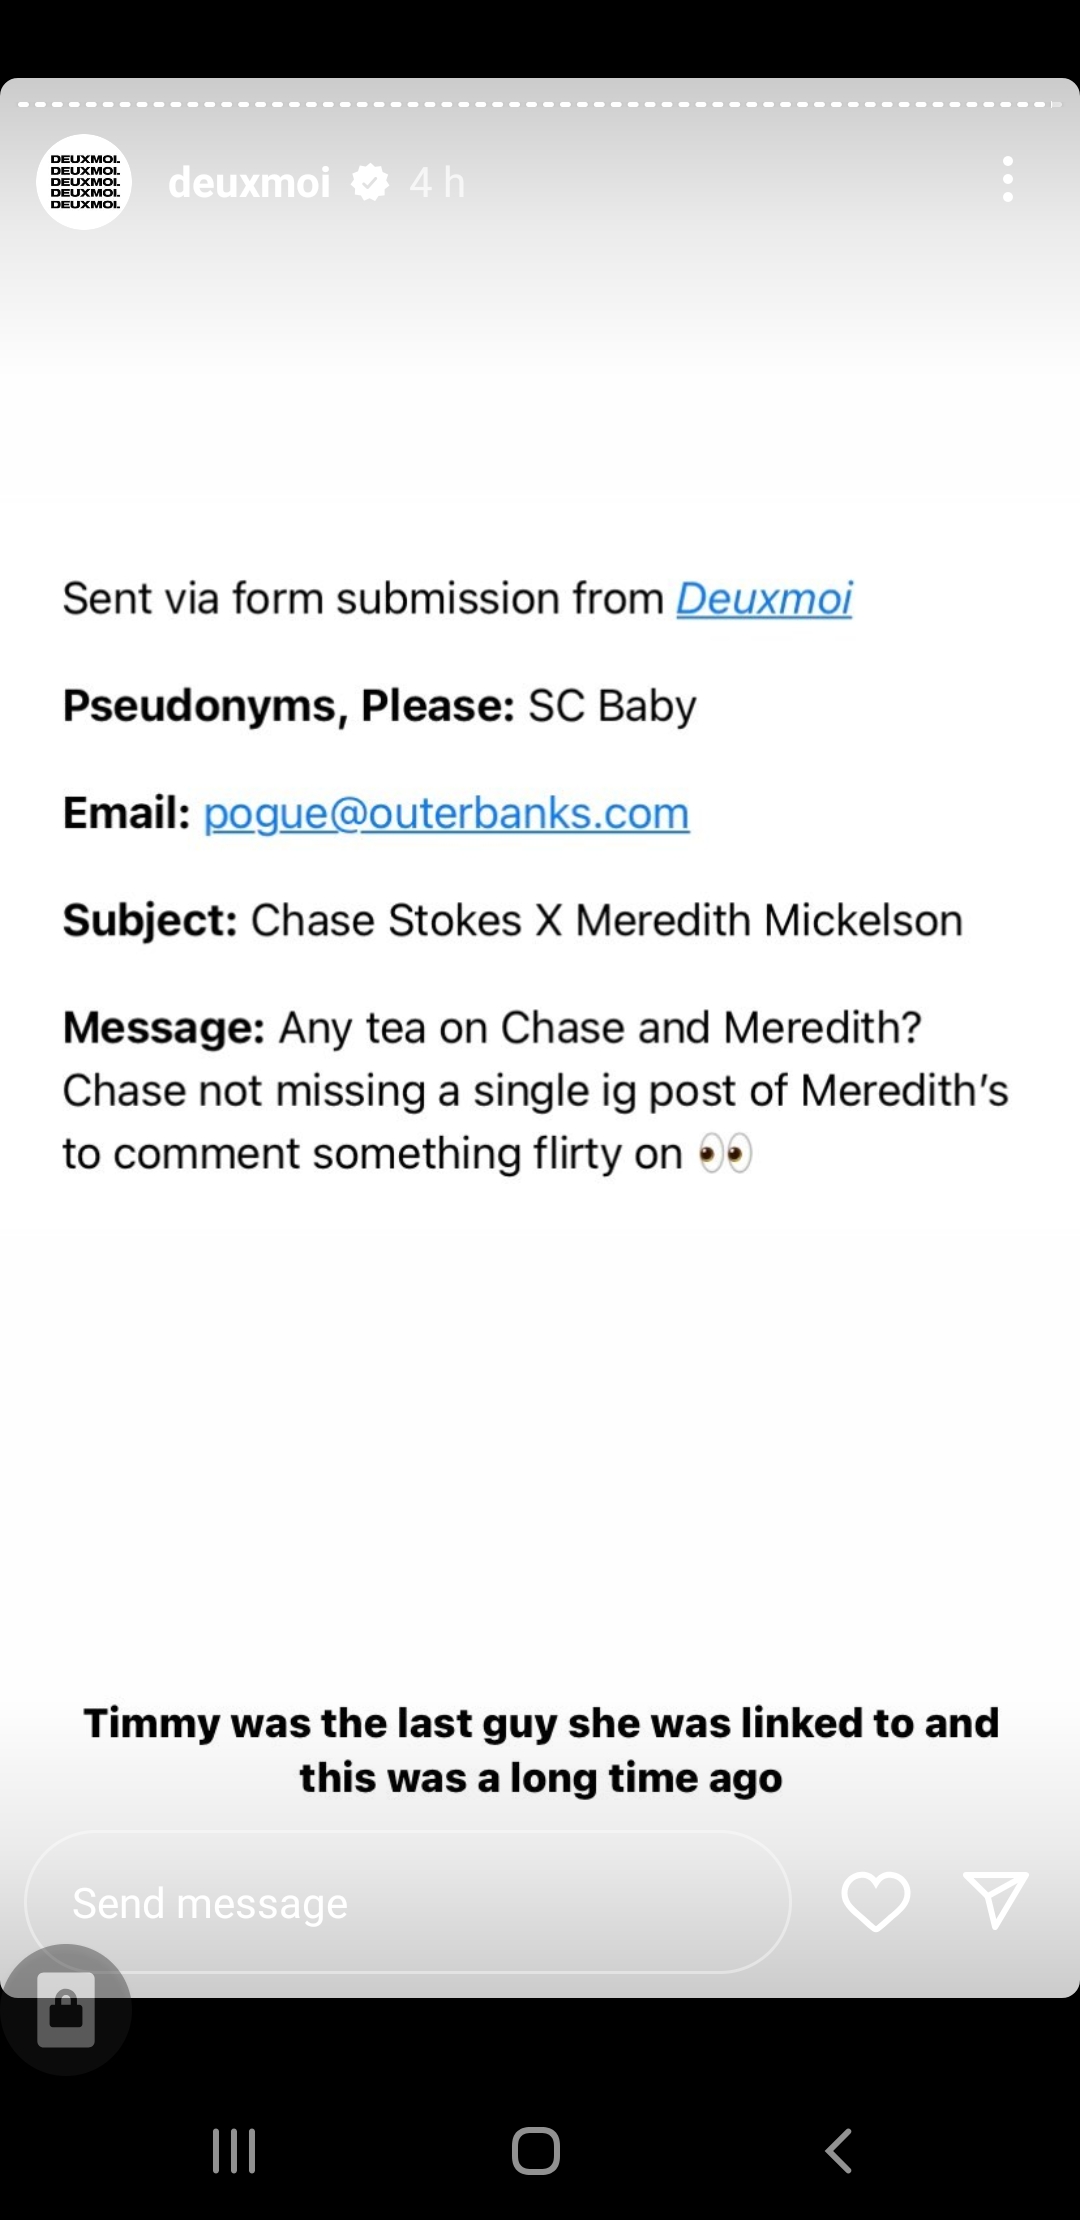 Deuxmoi response regarding Chase Stokes and Meredith Mickelson.